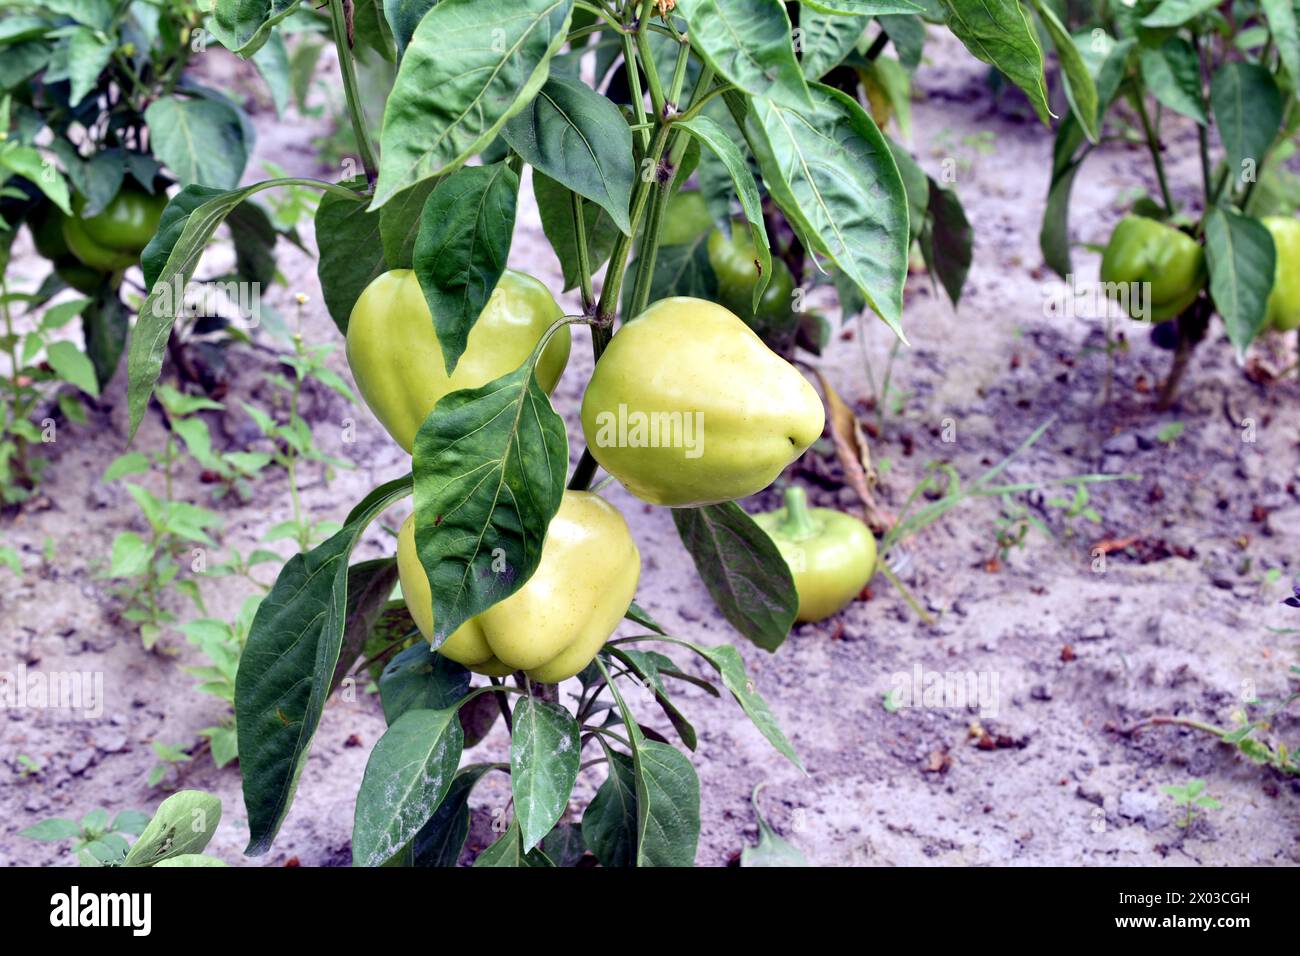 The picture shows a bell pepper bush where the peppers are ripening. Stock Photo